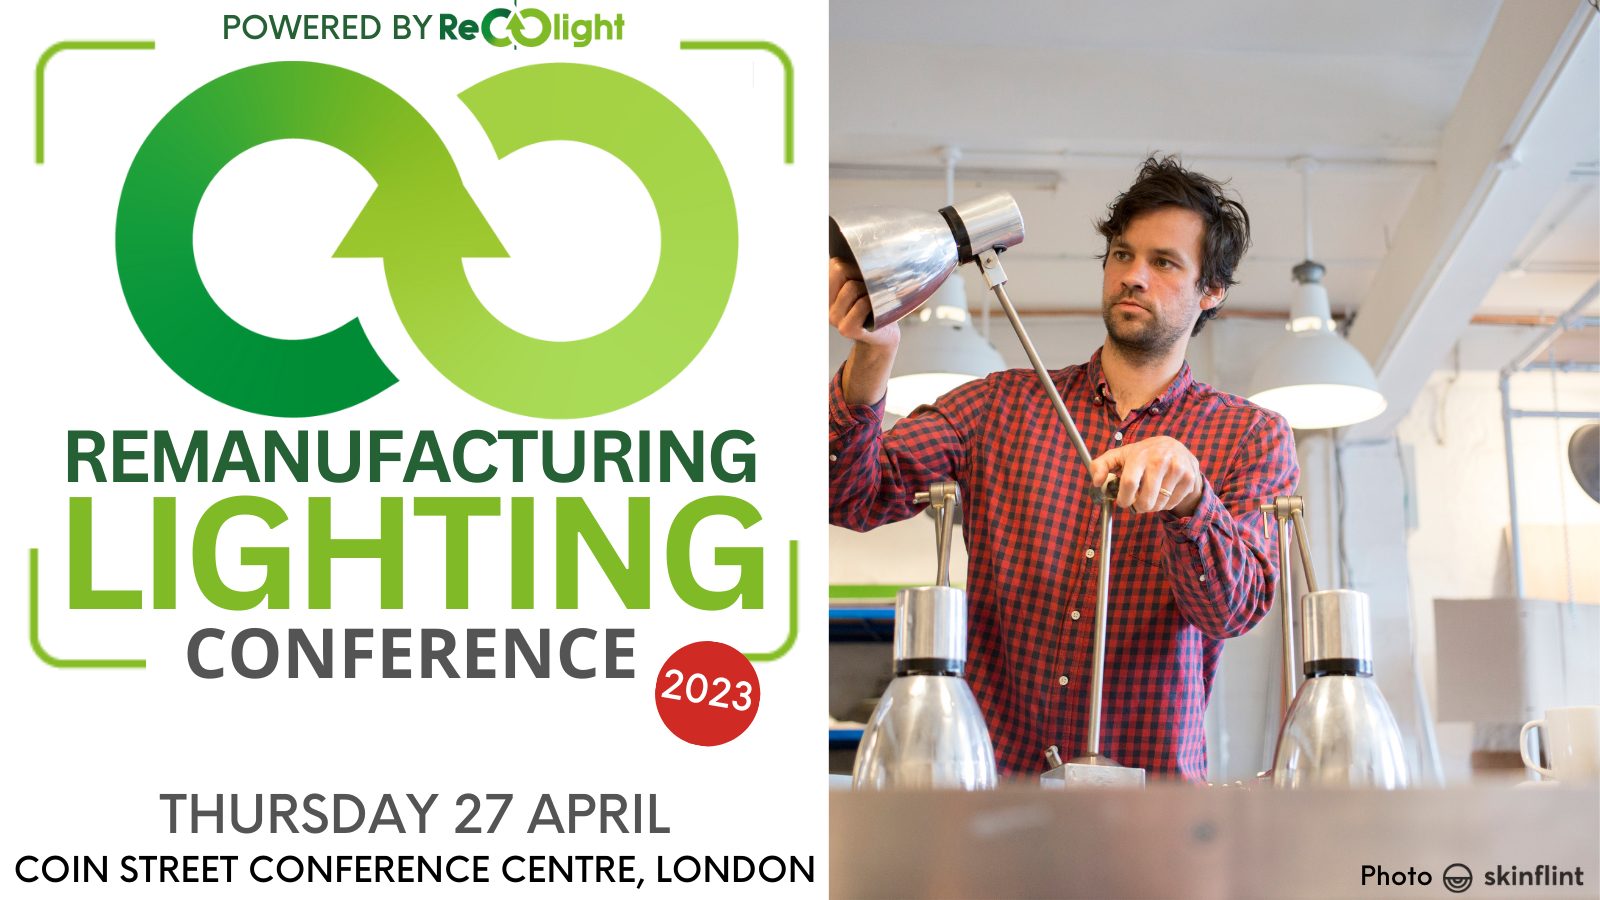 Announcing The Remanufacturing Lighting Conference